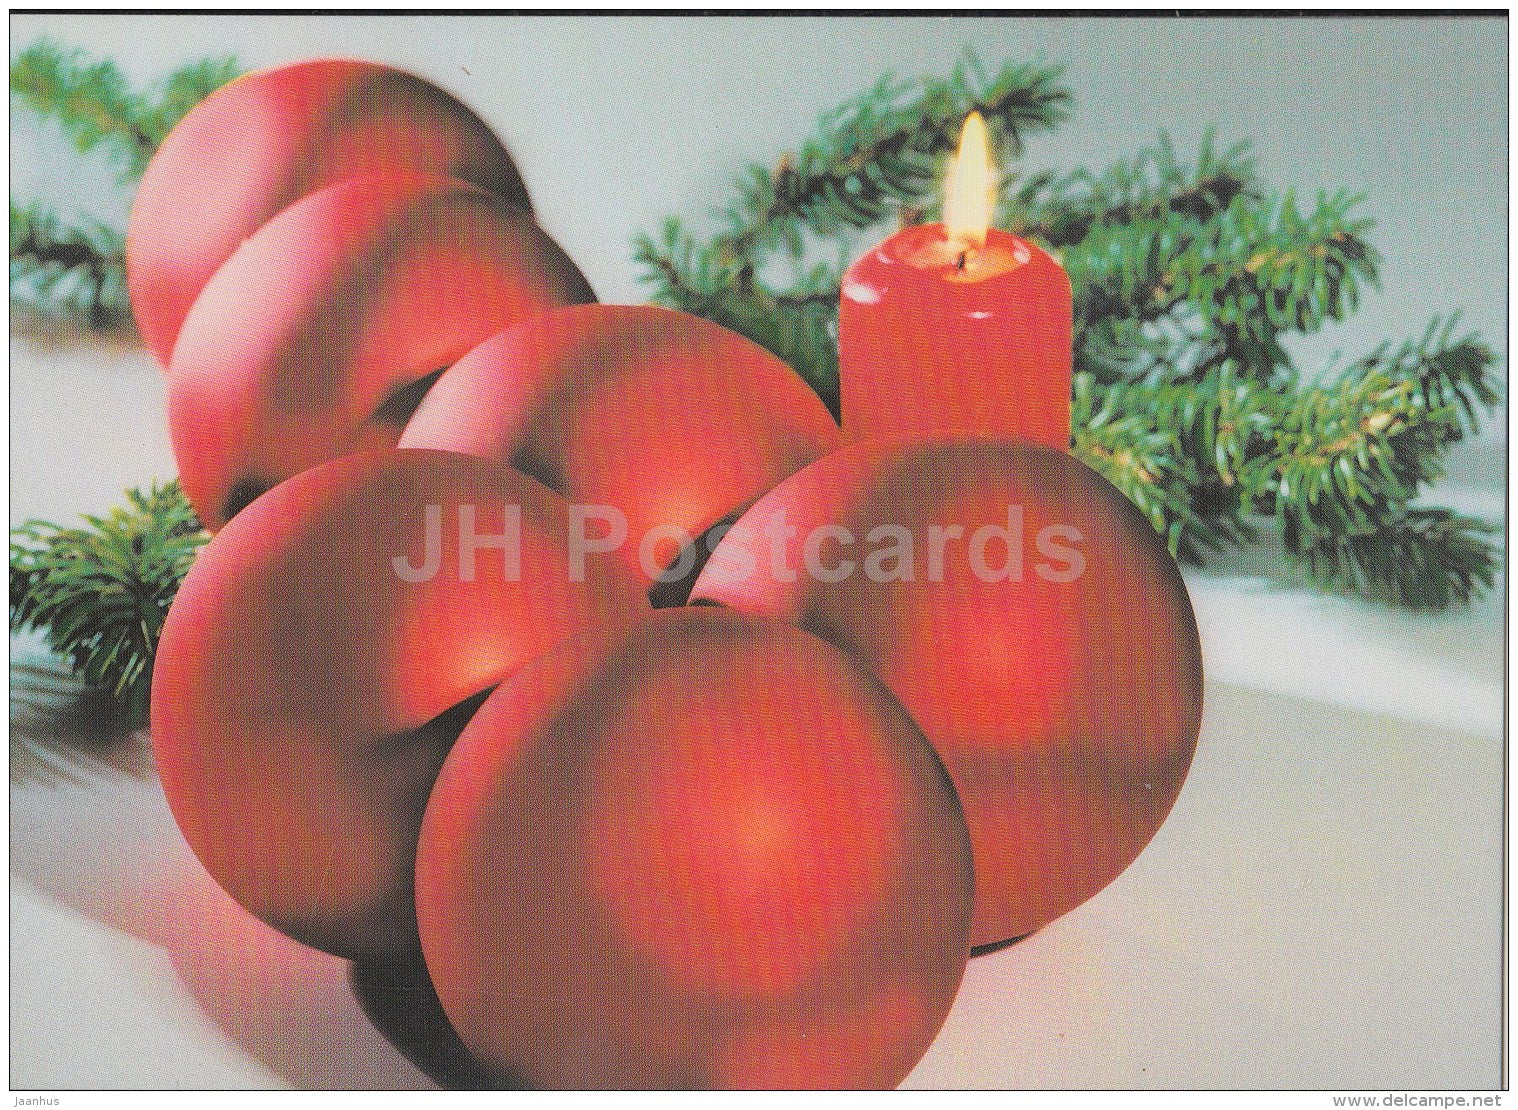 Christmas Greeting Card - decoration - candle - Estonia - used in 1998 - JH Postcards